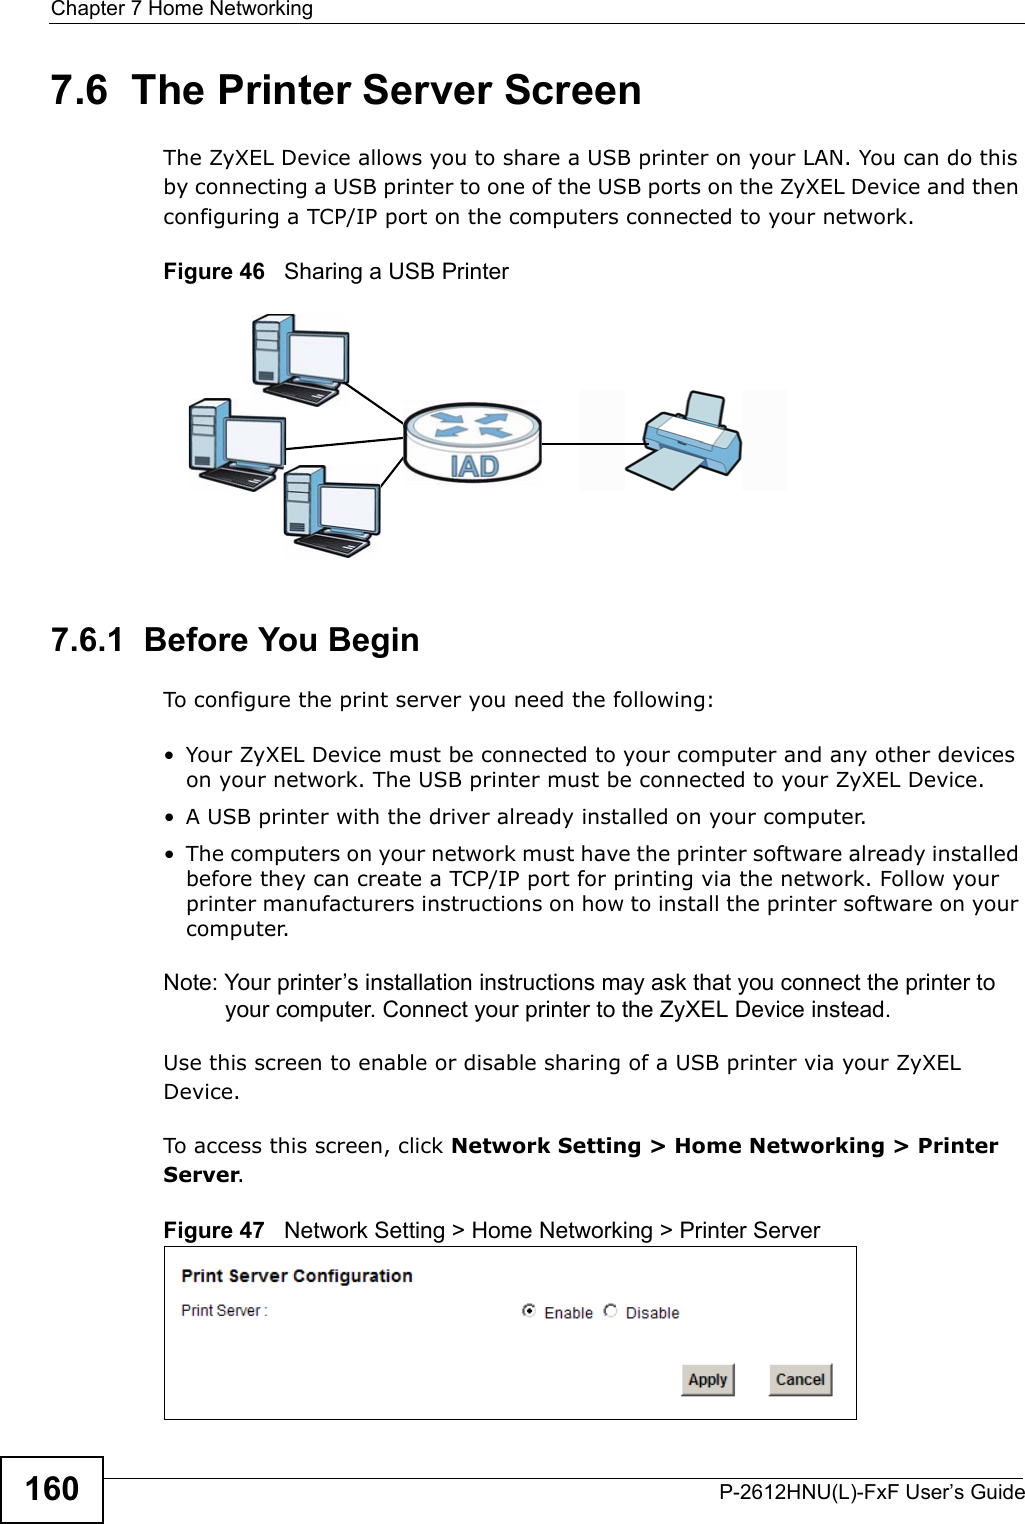 Chapter 7 Home NetworkingP-2612HNU(L)-FxF User’s Guide1607.6  The Printer Server ScreenThe ZyXEL Device allows you to share a USB printer on your LAN. You can do this by connecting a USB printer to one of the USB ports on the ZyXEL Device and then configuring a TCP/IP port on the computers connected to your network.Figure 46   Sharing a USB Printer7.6.1  Before You BeginTo configure the print server you need the following:• Your ZyXEL Device must be connected to your computer and any other devices on your network. The USB printer must be connected to your ZyXEL Device.• A USB printer with the driver already installed on your computer.• The computers on your network must have the printer software already installedbefore they can create a TCP/IP port for printing via the network. Follow your printer manufacturers instructions on how to install the printer software on your computer. Note: Your printer’s installation instructions may ask that you connect the printer to your computer. Connect your printer to the ZyXEL Device instead.Use this screen to enable or disable sharing of a USB printer via your ZyXEL Device. To access this screen, click Network Setting &gt; Home Networking &gt; PrinterServer.Figure 47   Network Setting &gt; Home Networking &gt; Printer Server